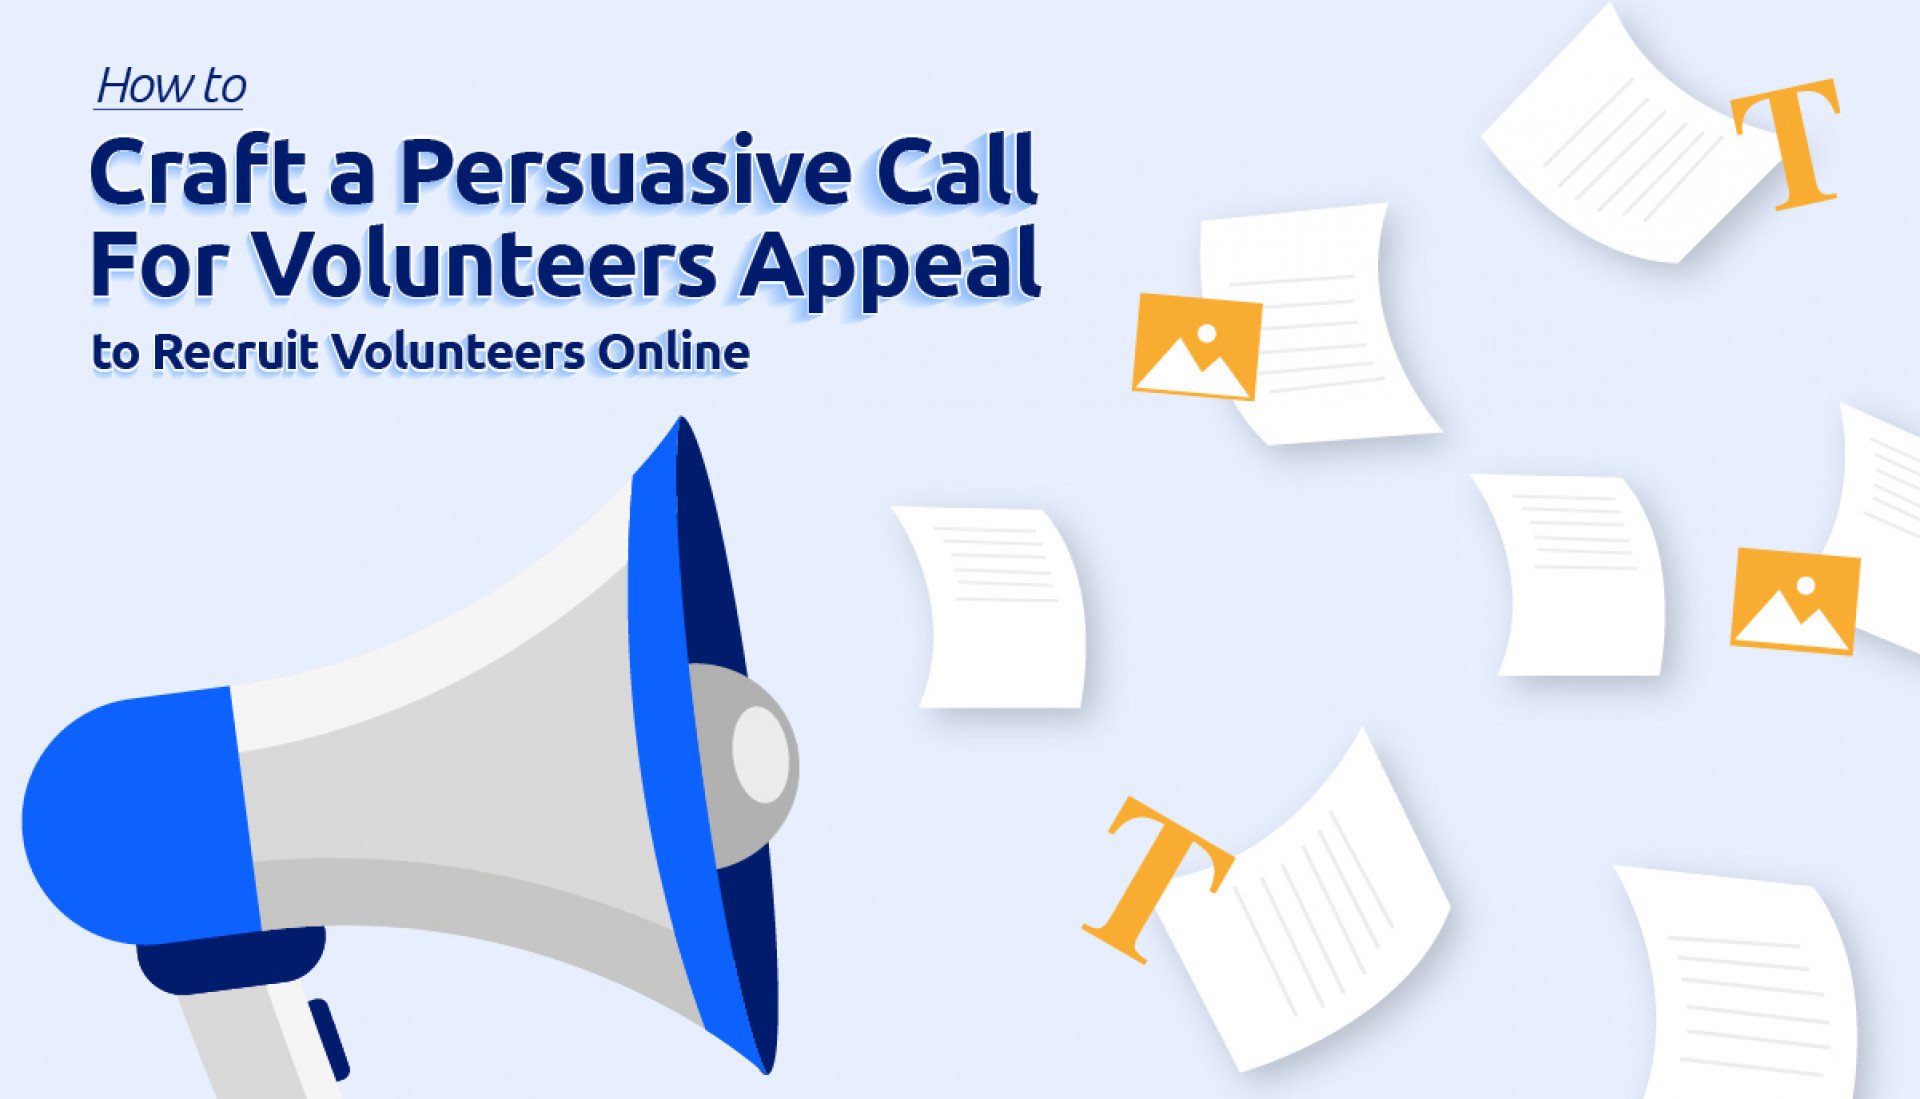 How to Craft a Persuasive Call for Volunteers Appeal To Recruit Volunteers Online [with Writing Tips, Recruitment Ideas & Examples]